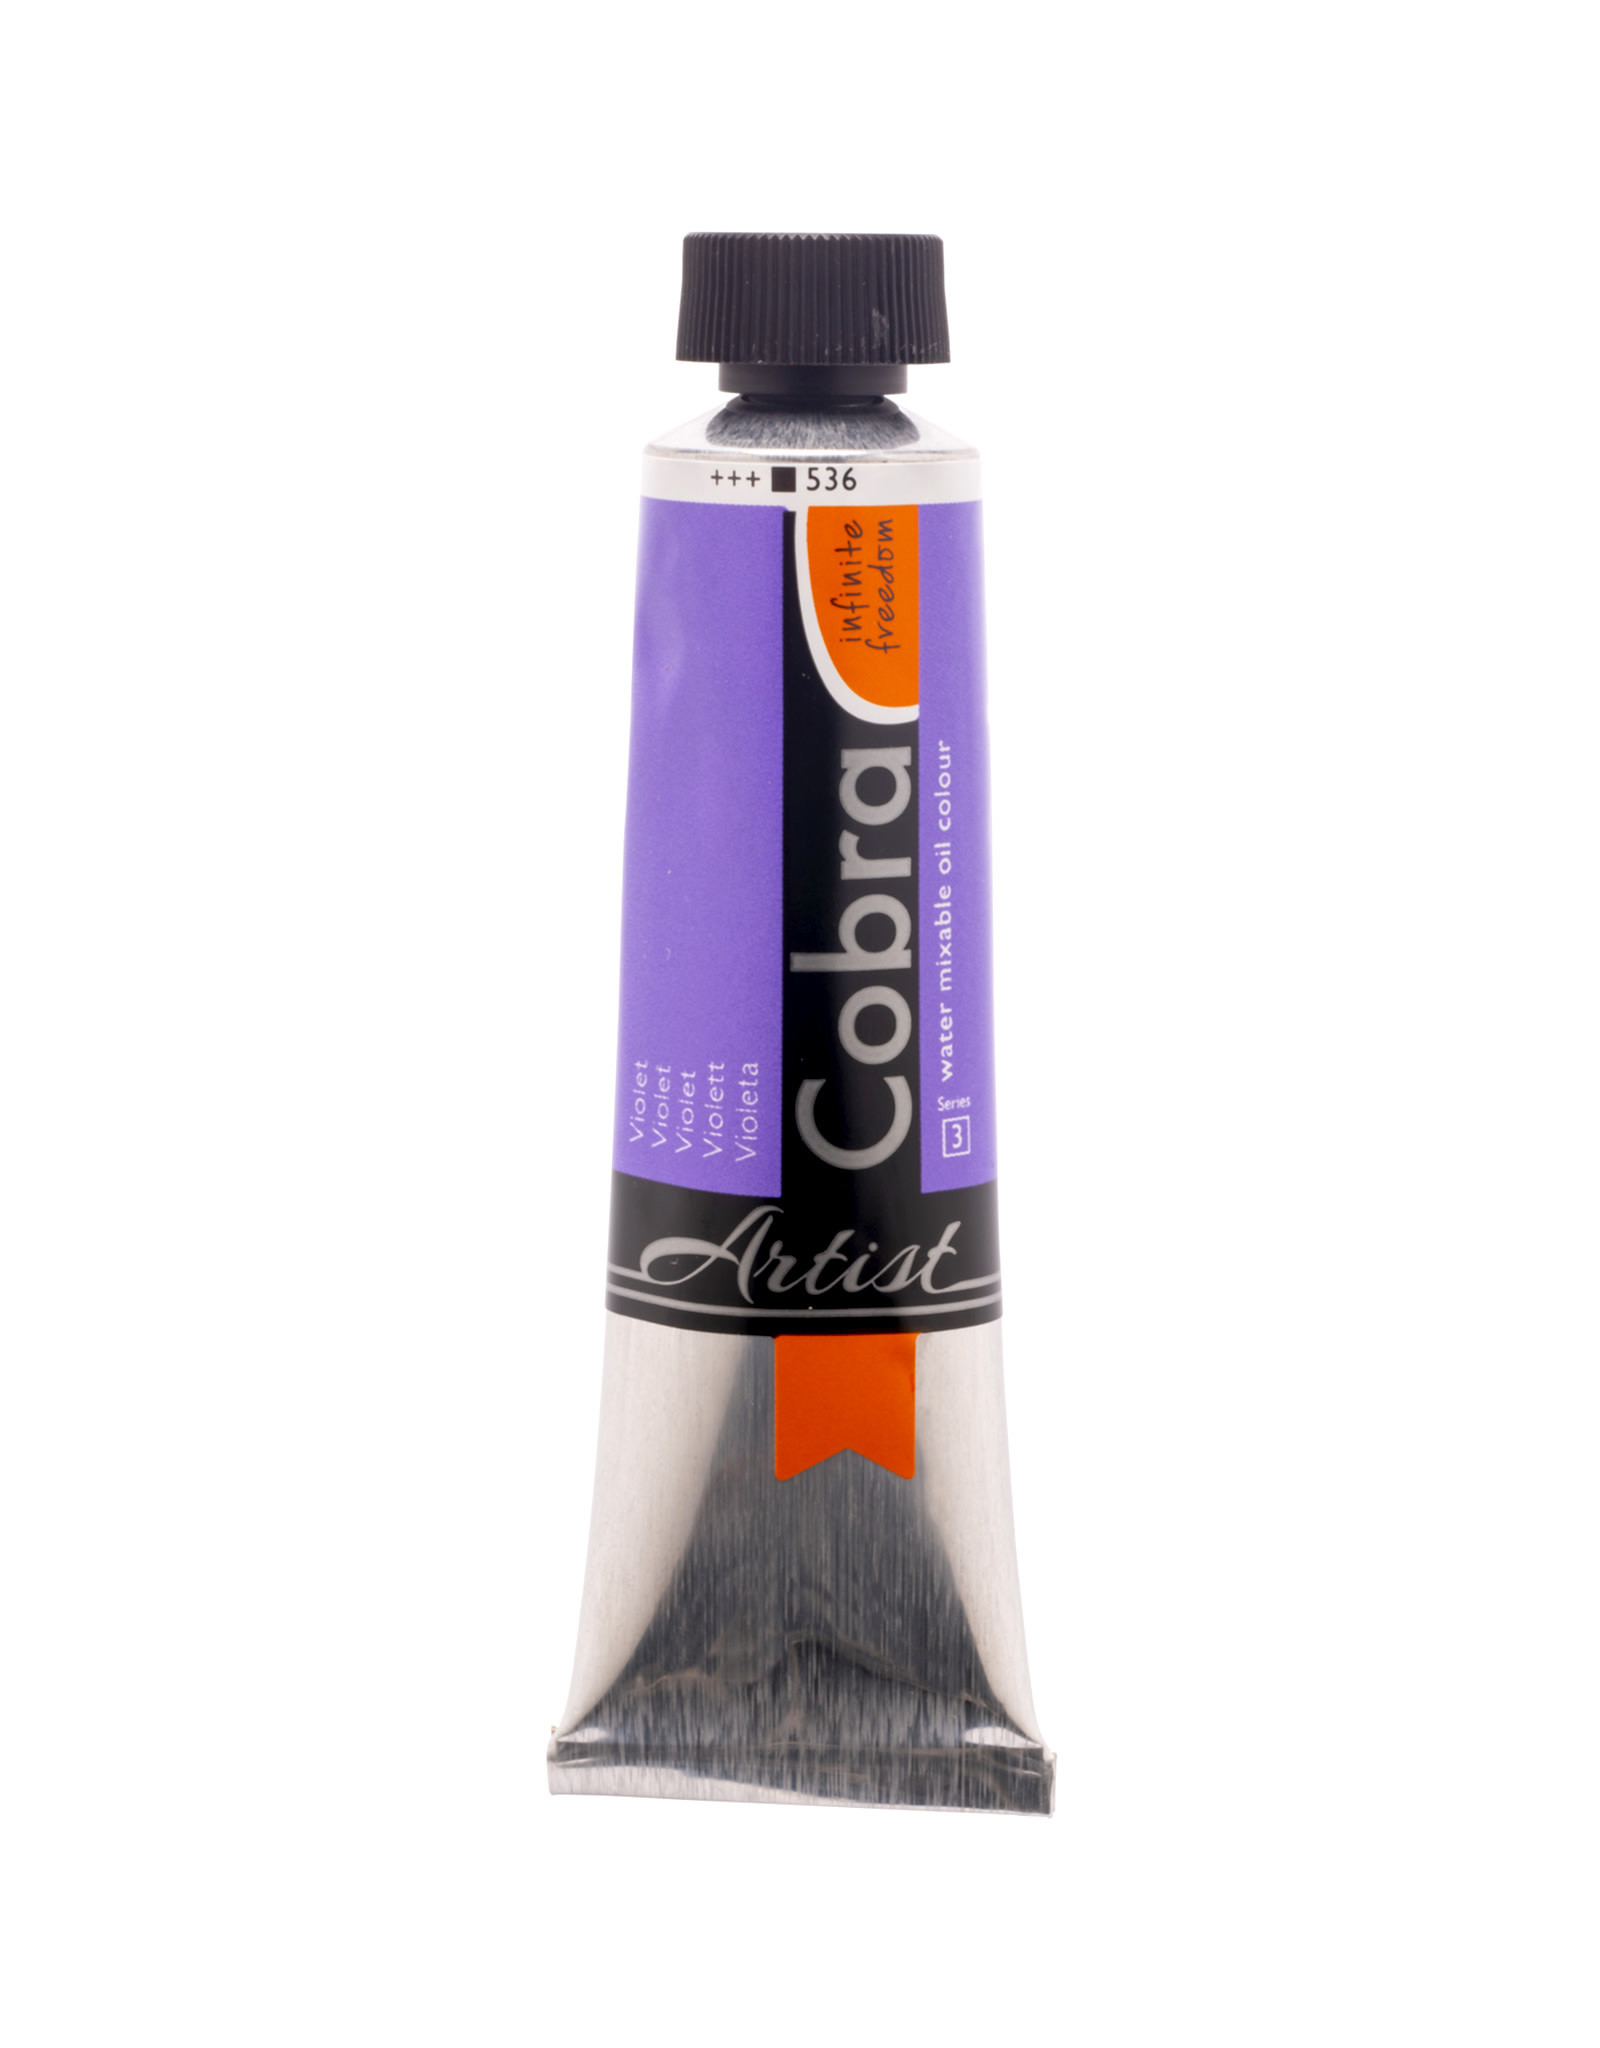 Royal Talens Cobra Water Mixable Artist Oils, Violet 40ml